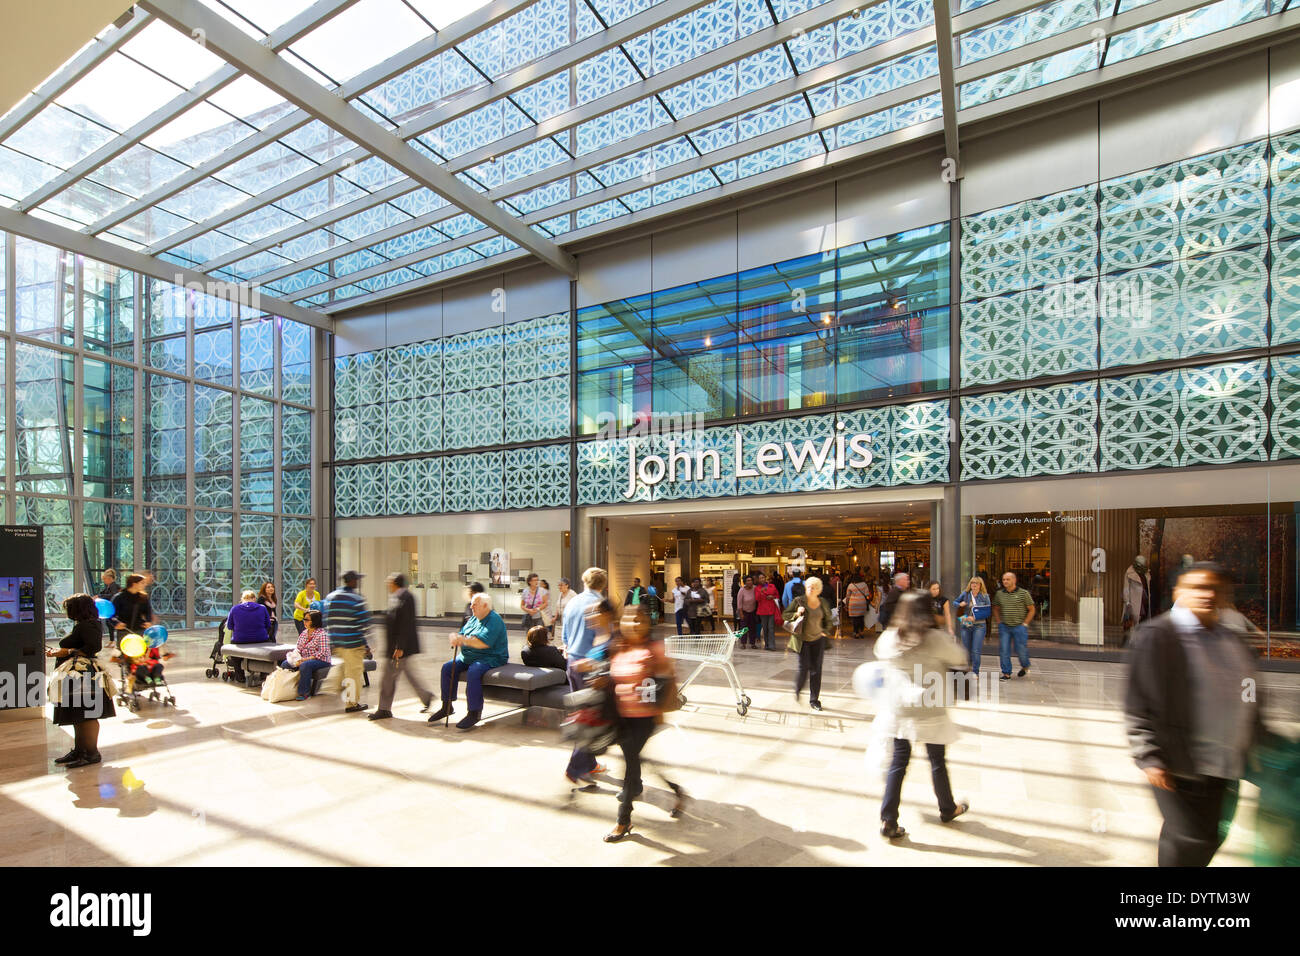 John Lewis store in the Westfield Shopping Centre in Stratford, London Stock Photo